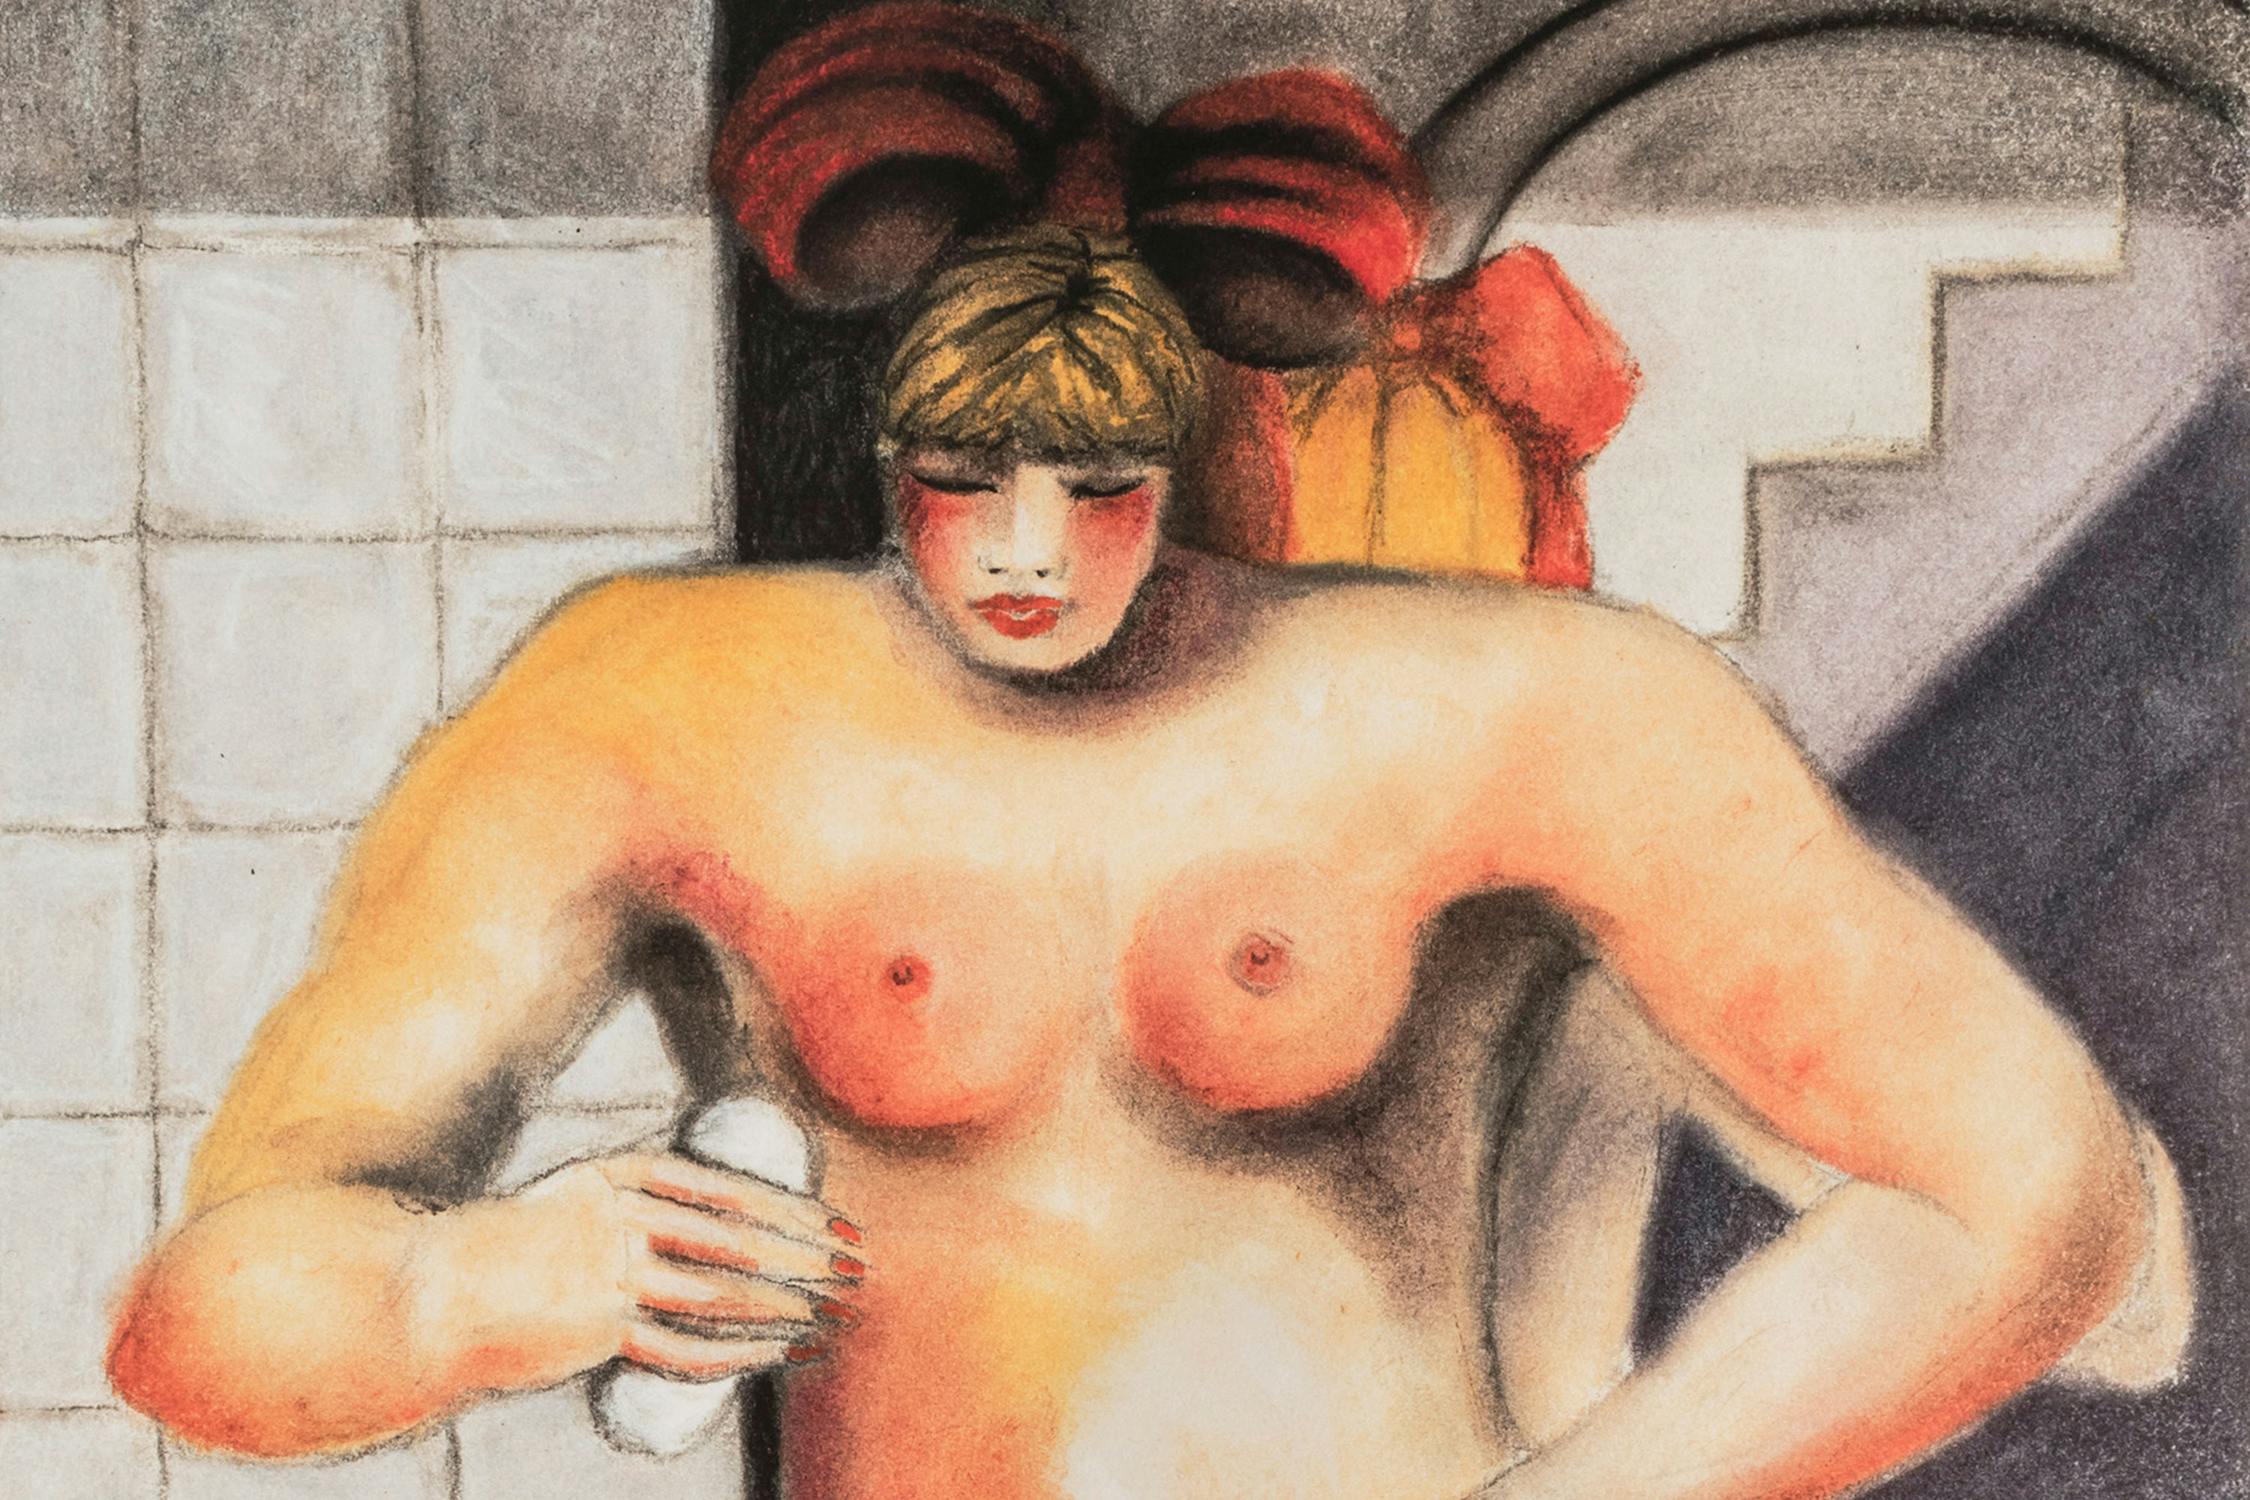 A cropped chalk pastel drawing of a nude women with a bright red bow in her hair, red cheeks, holding a bar of soap